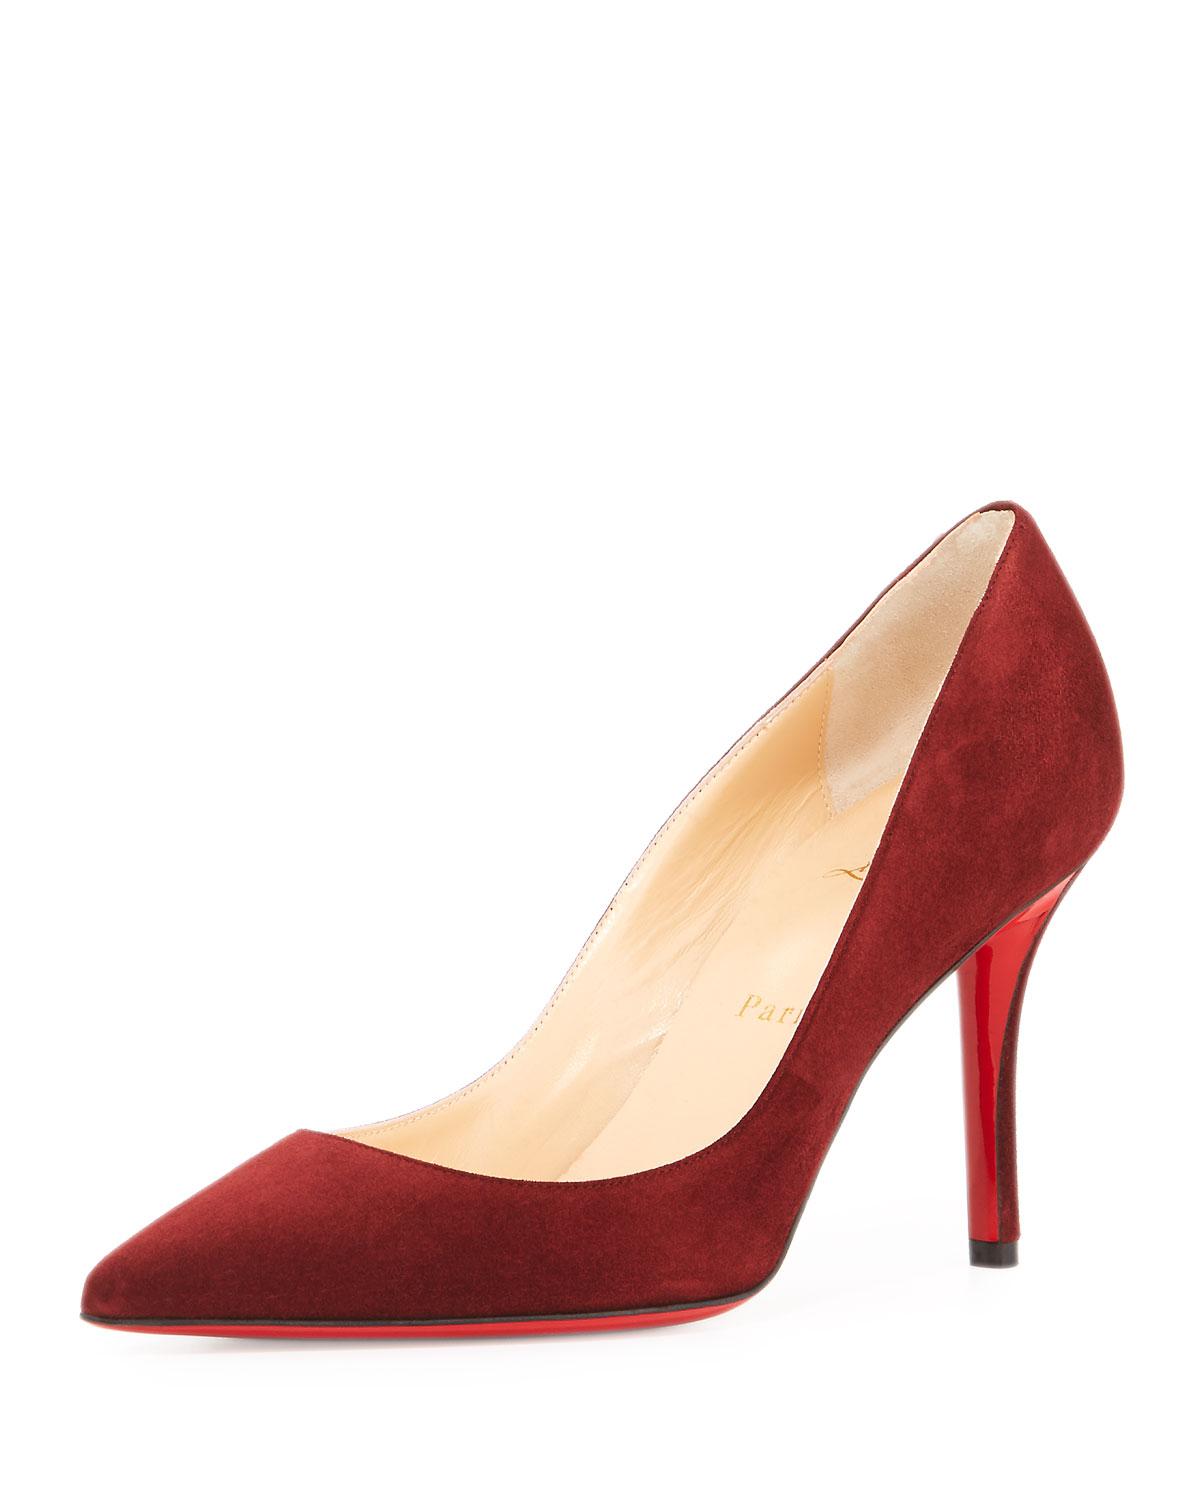 Christian Louboutin Apostrophy Suede 85mm Red Sole Pump - Lyst